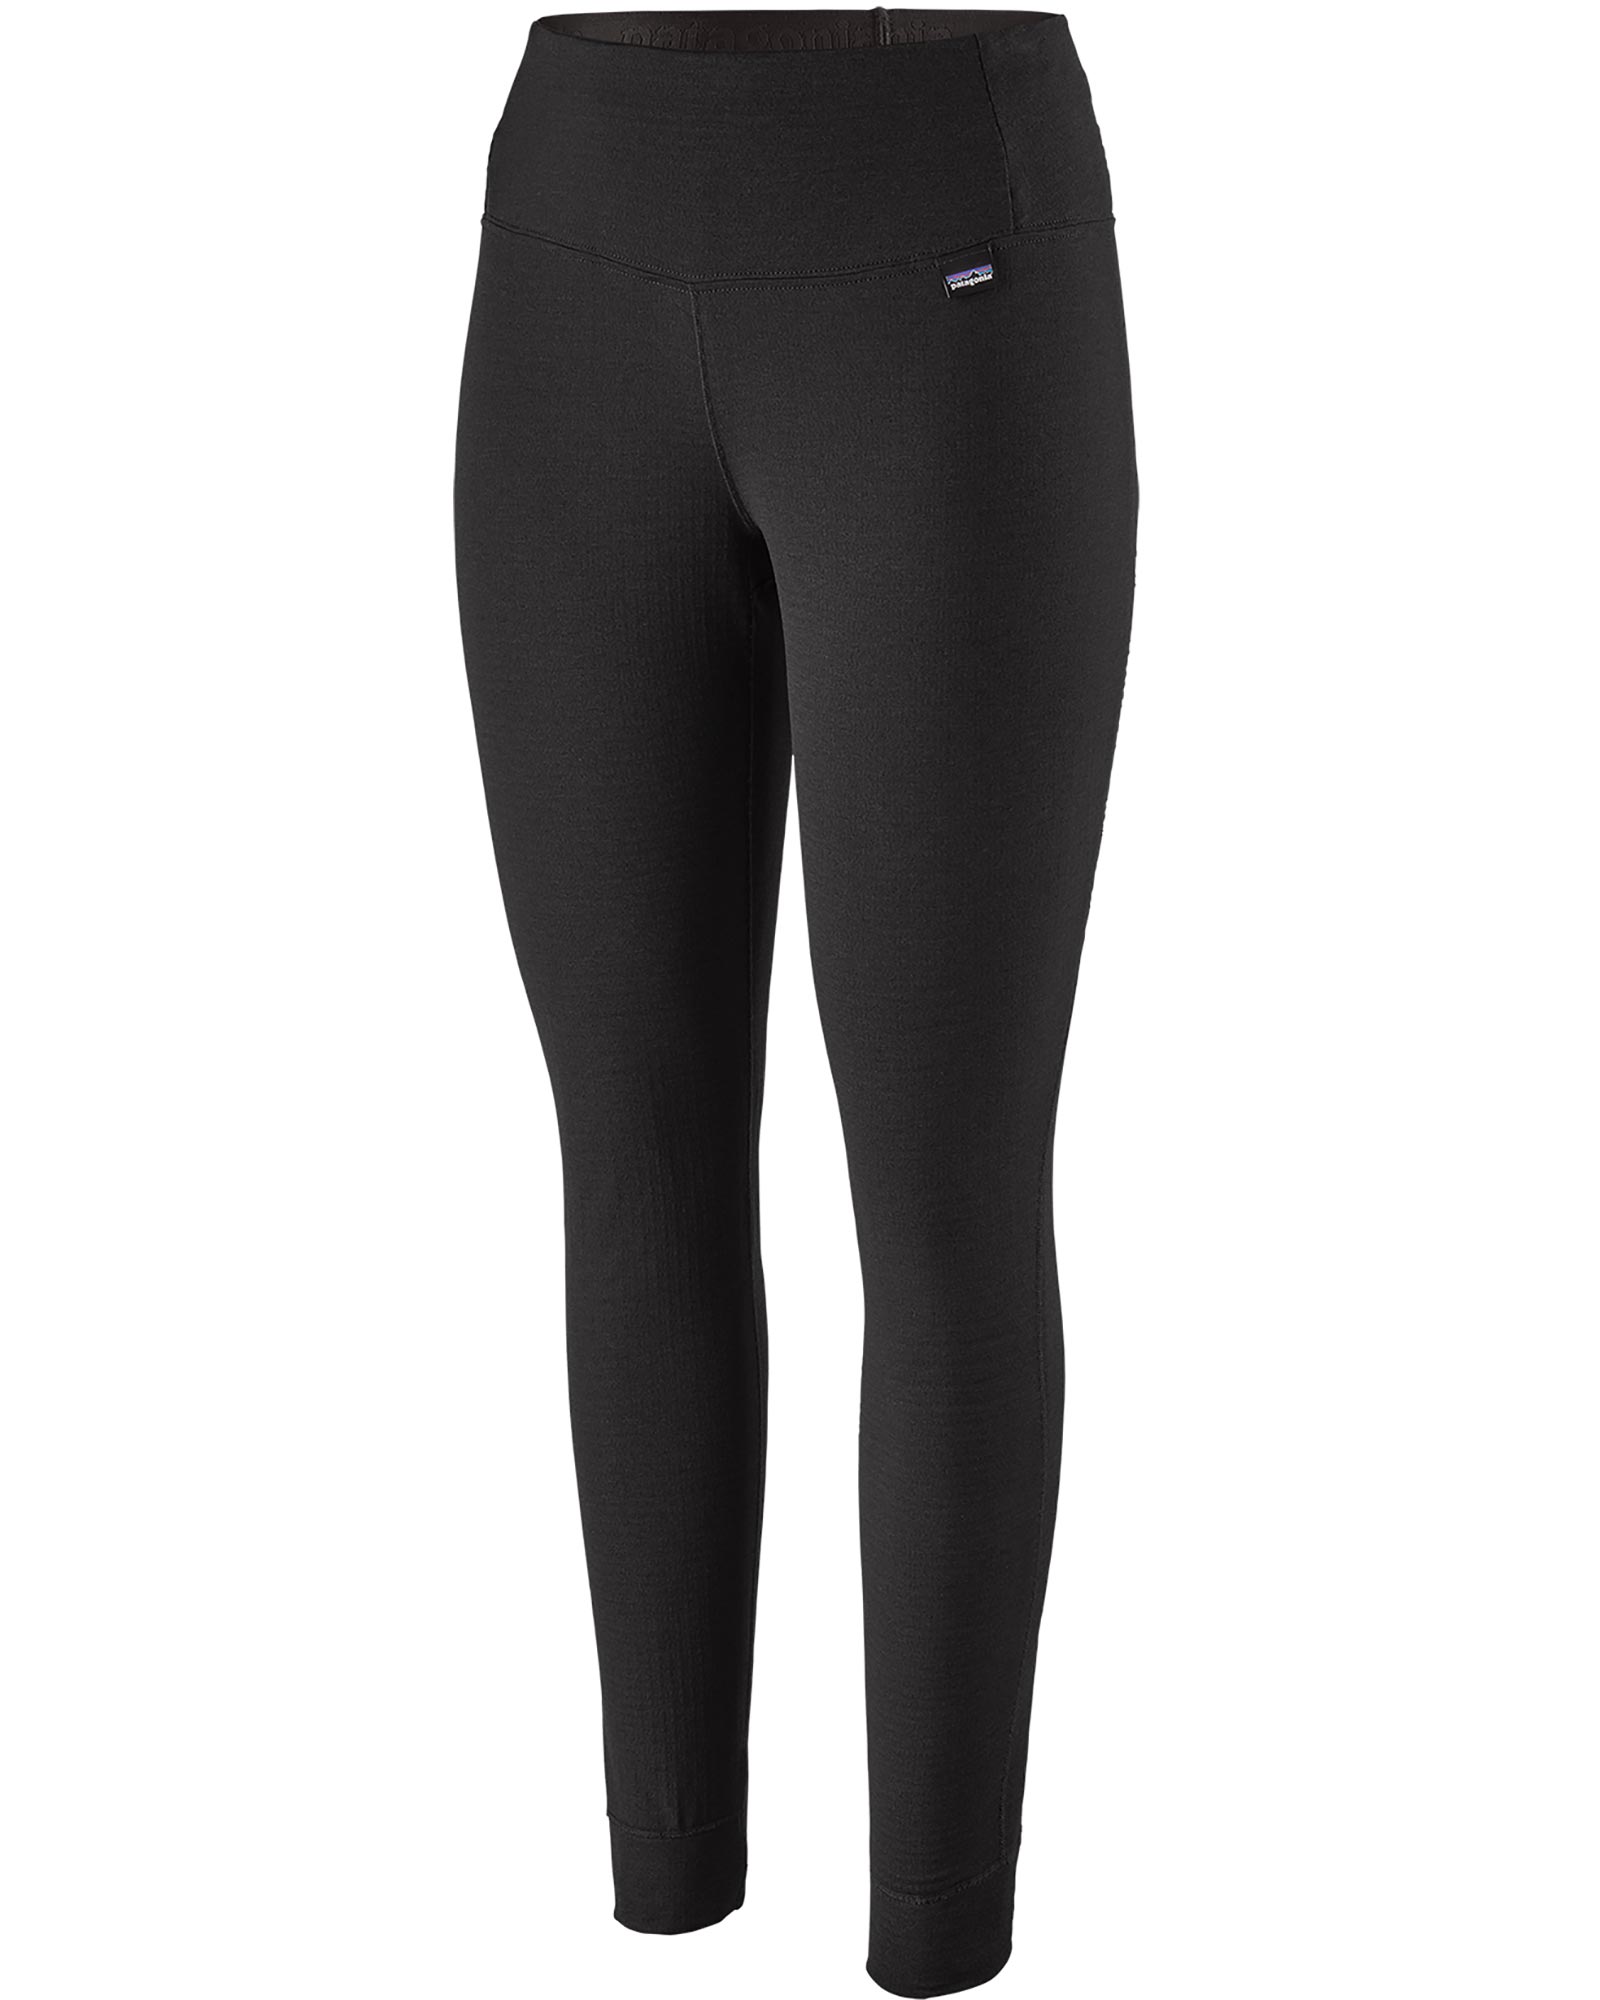 Patagonia Capilene Women’s Thermal Weight Tights - black XS